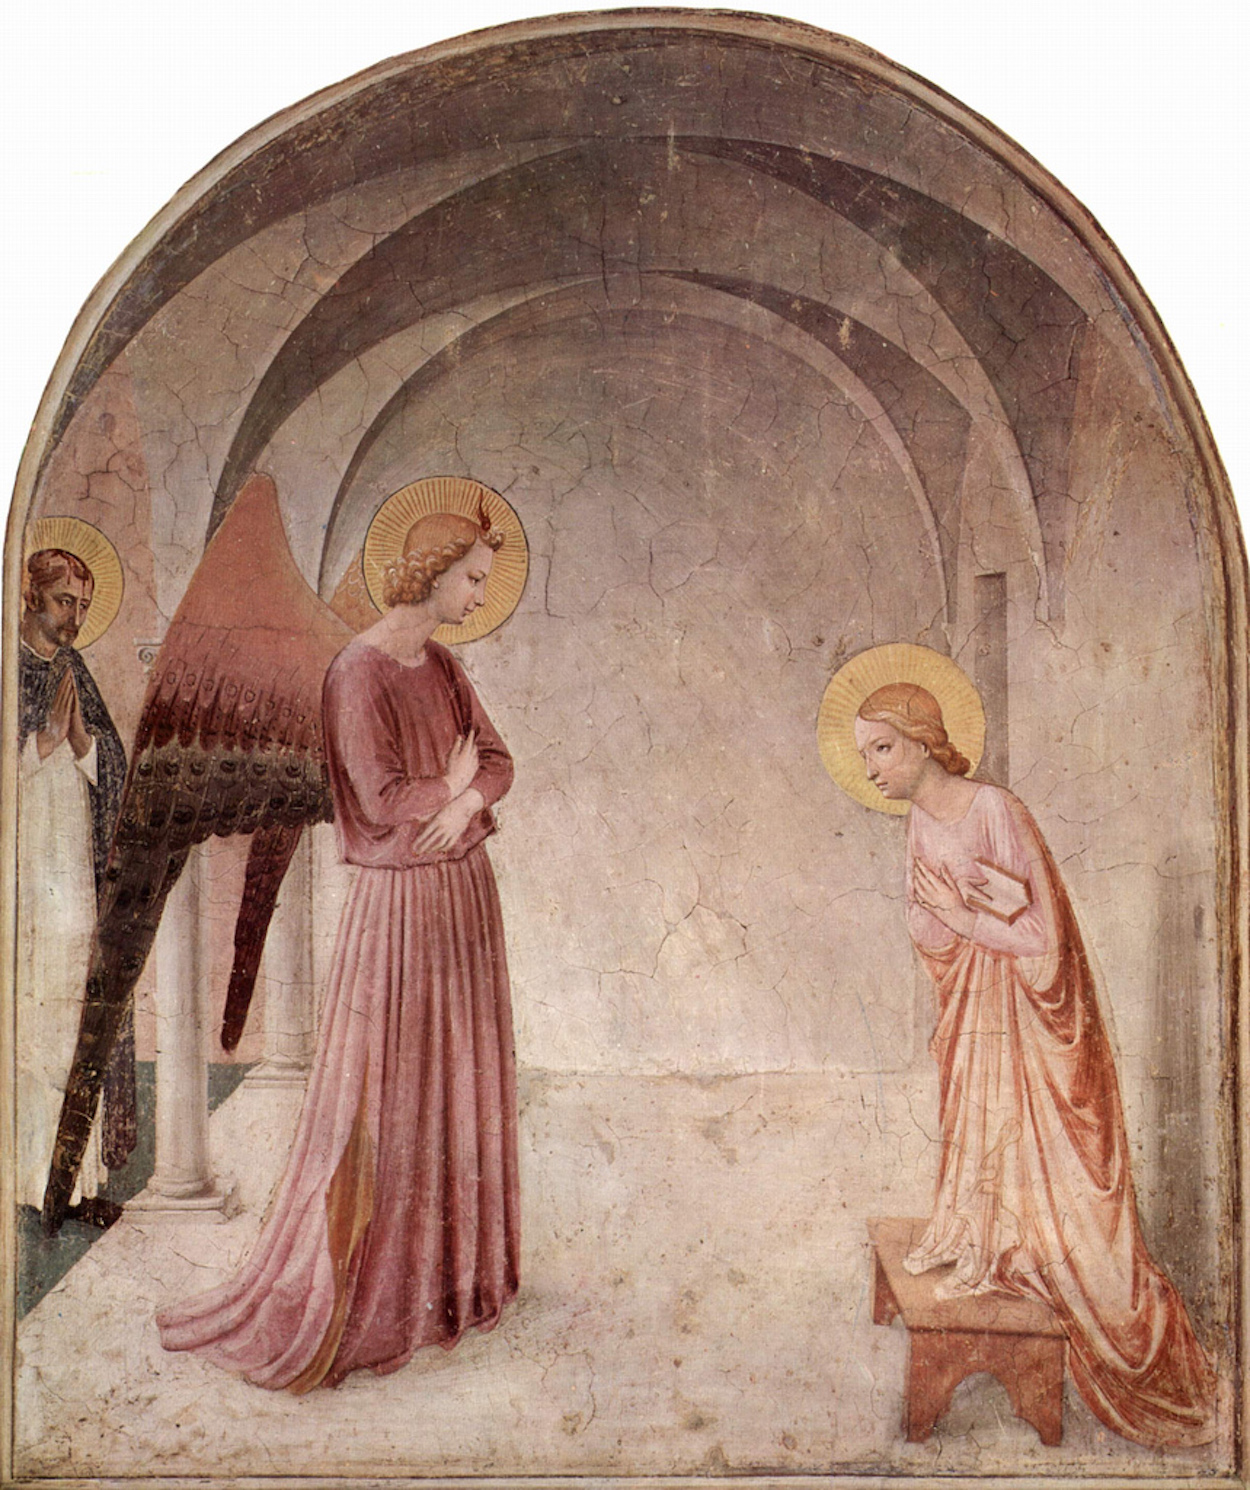 Aankondiging by Fra Angelico - c. 1441 - 176 x 148 cm 